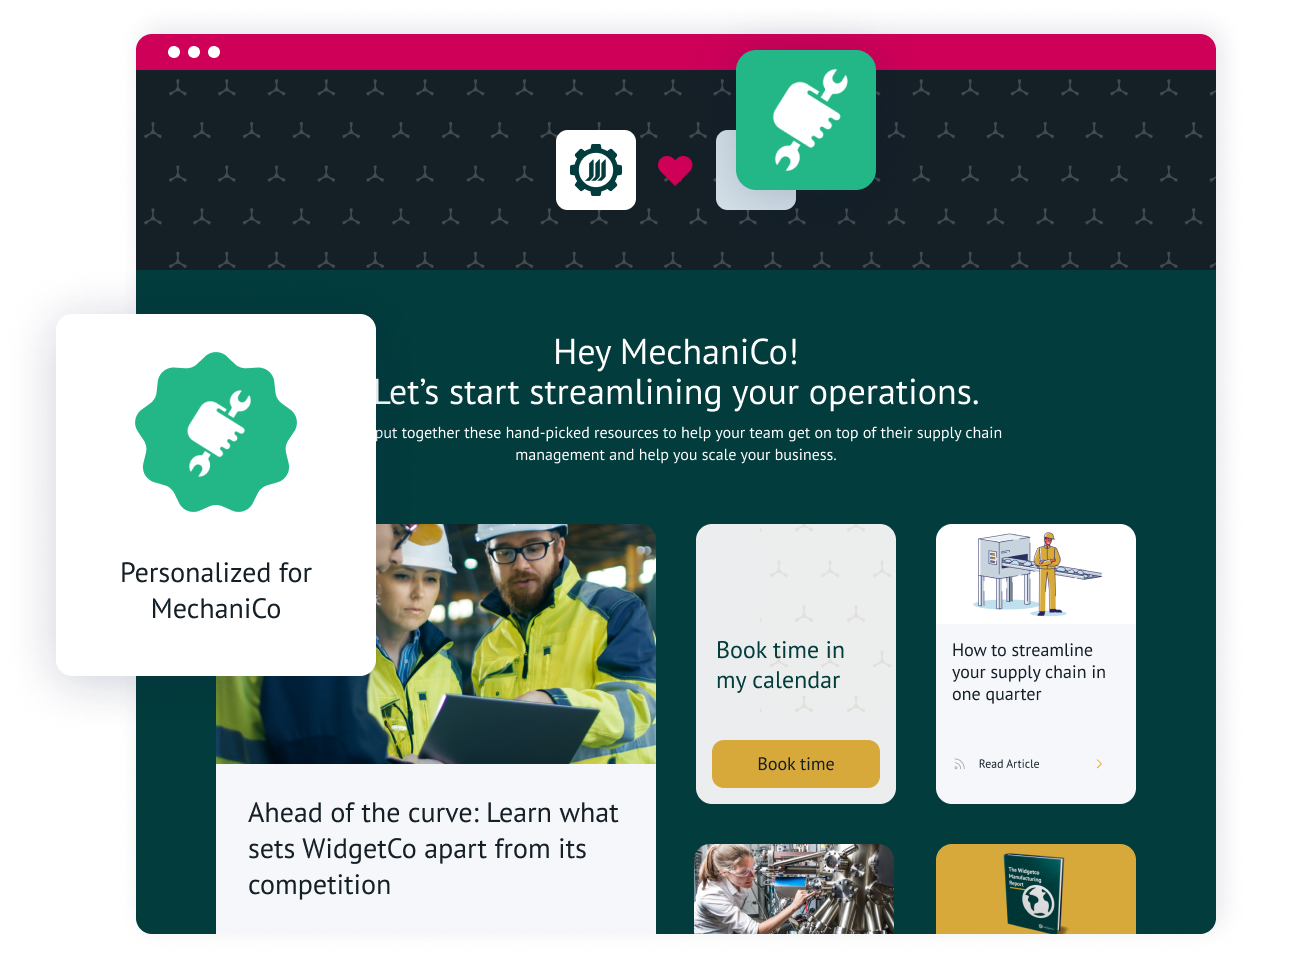 Example of personalized content experience for MechaniCo being used on Uberflip platform